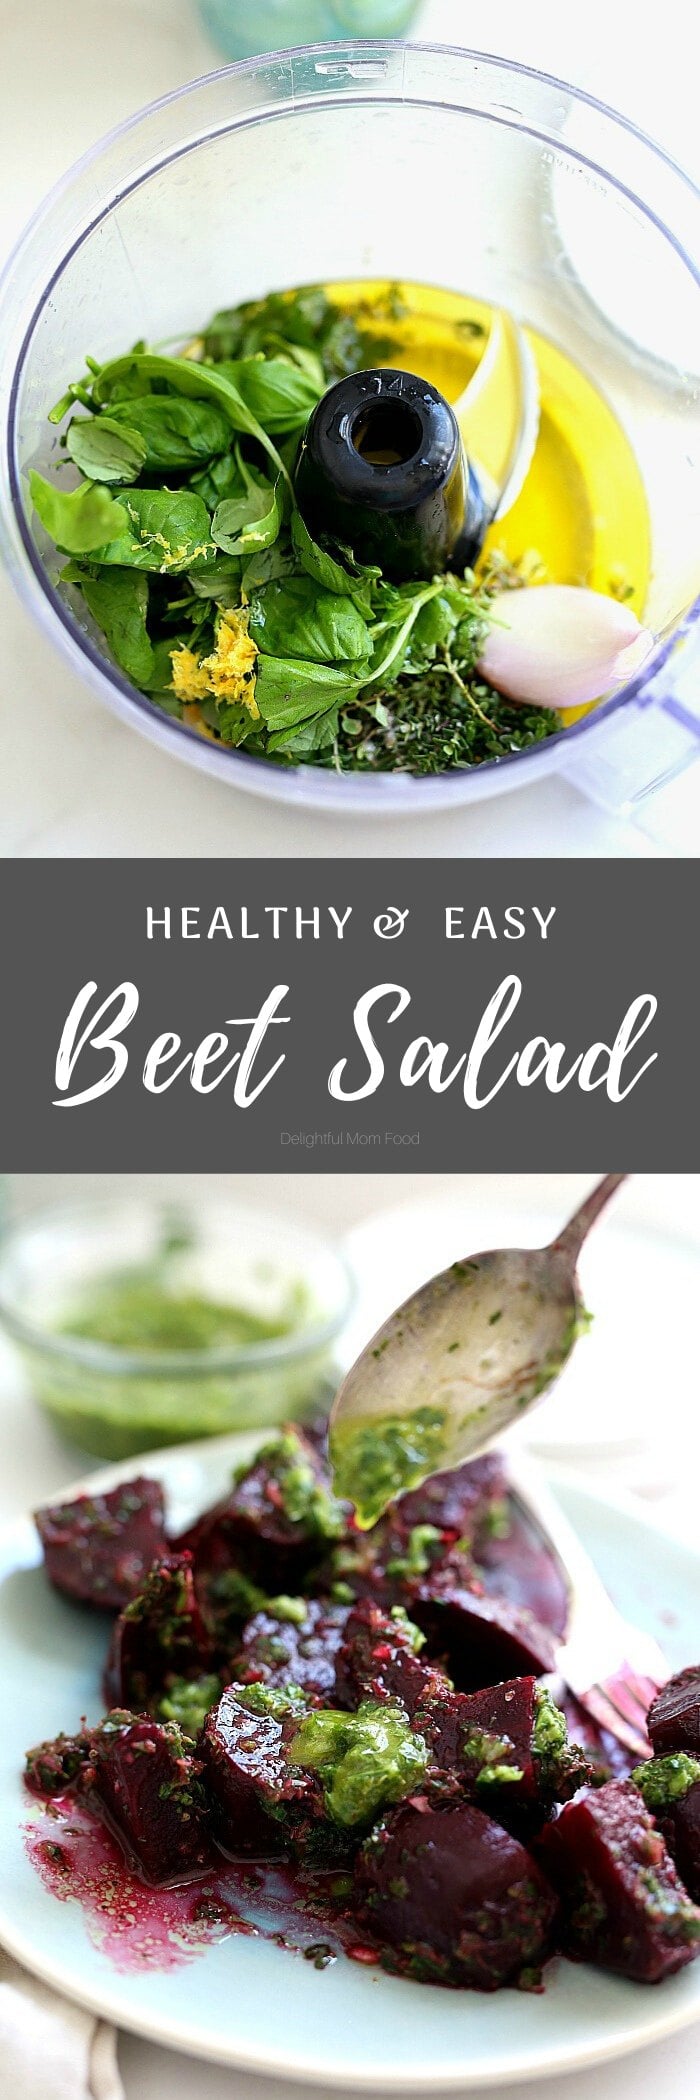 Easy Roasted Beet Salad with Zesty Herb Vinaigrette Dressing is a delectable salad served with a thyme, parsley and basil vinaigrette dressing. This simple salad is all about just beets roasted as a side salad yet can also be served over fresh arugula leaves and goat cheese to transform into a main dish. #roastedbeets #beetsalad #salad #sidedishes #healthy #glutenfree #vegan #recipe #herbdressing #dressingforbeets #beetrecipes | Recipe at Delightful Mom Food